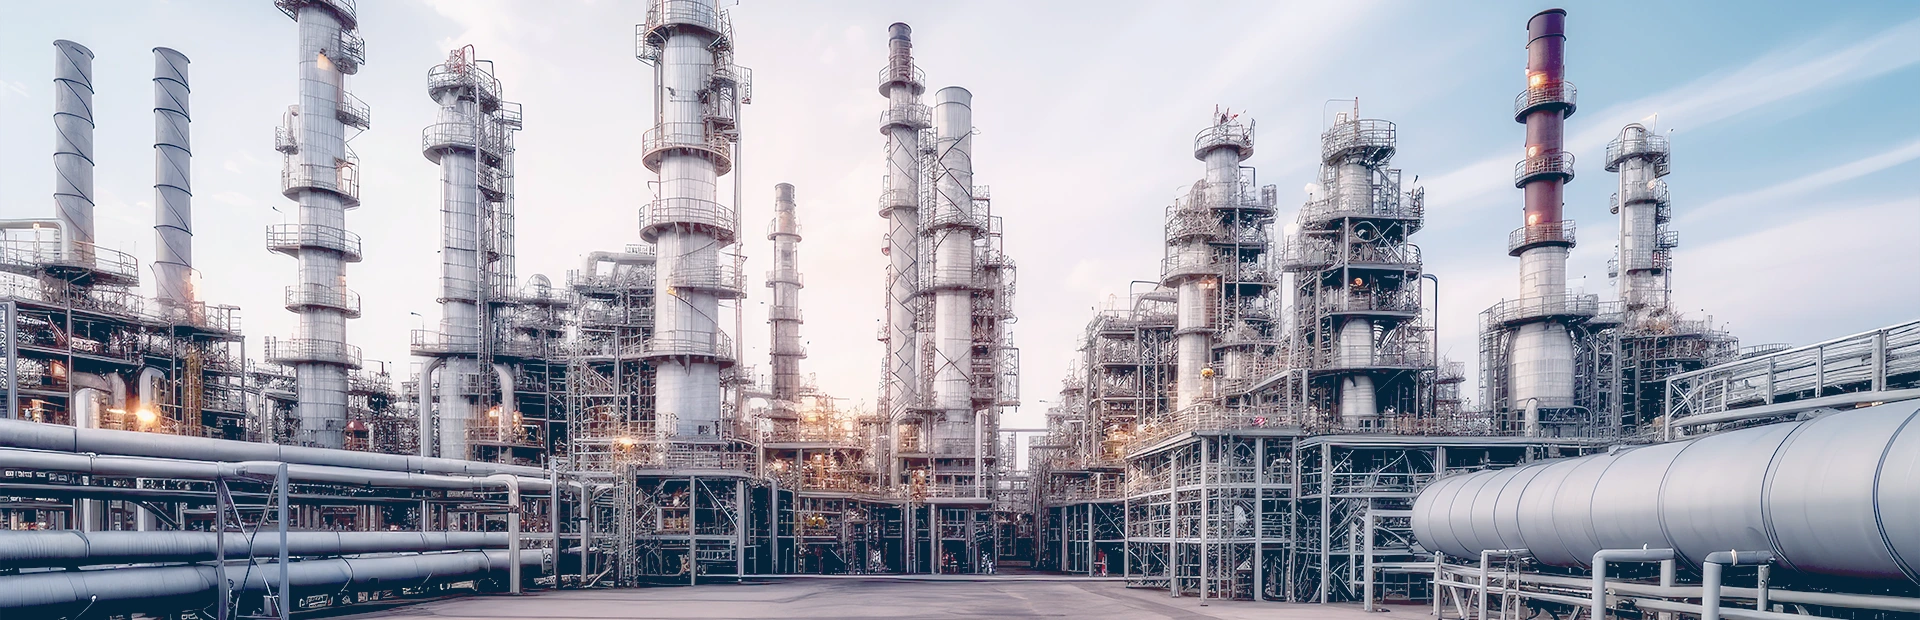 Top-notch Valve Solutions for Chemical & Petrochemical Industries | KV Controls